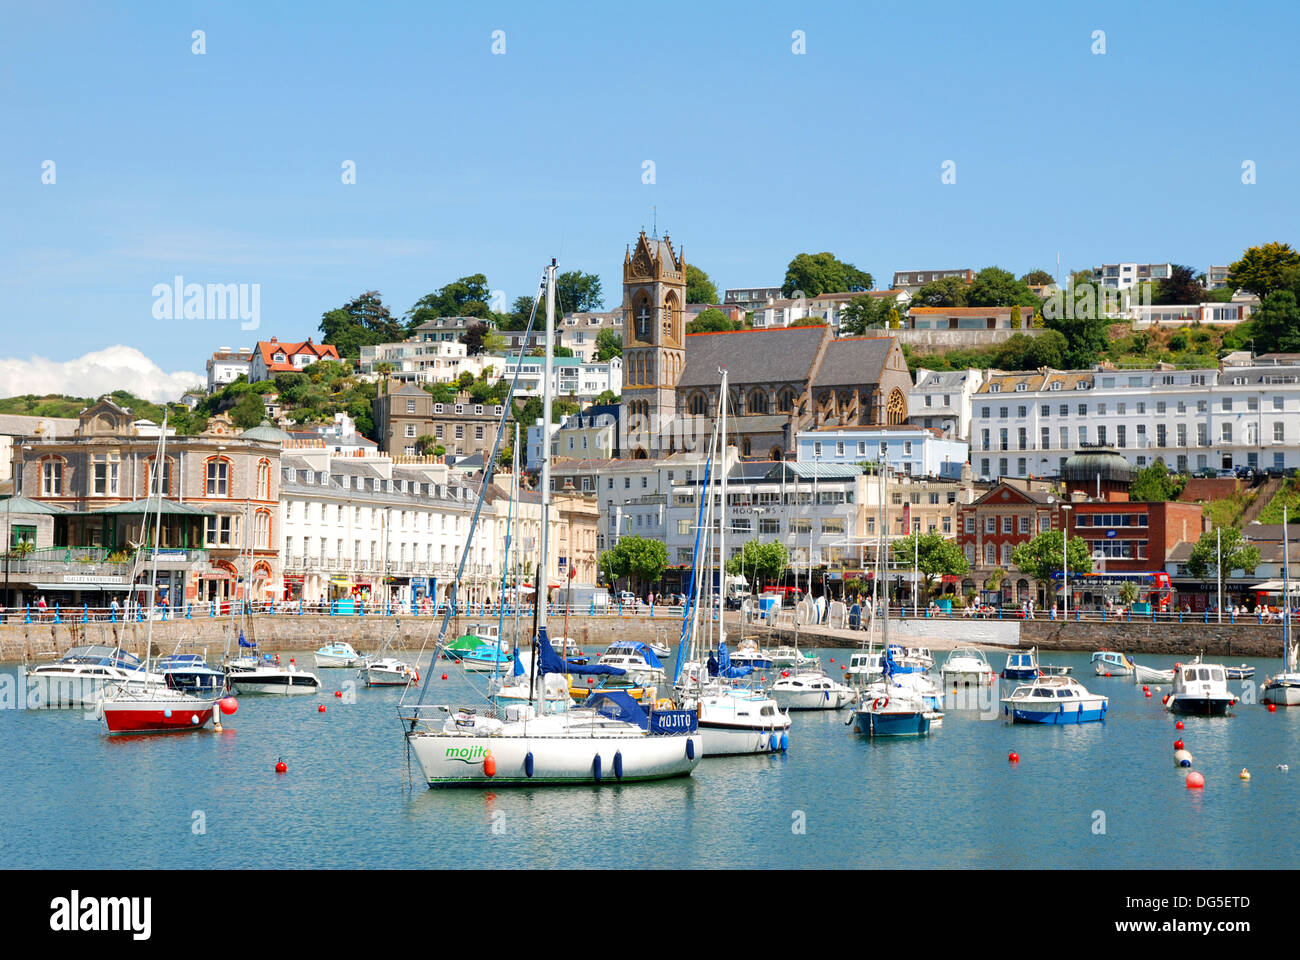 Boats in the harbour at Torquay, Devon, UK Stock Photo